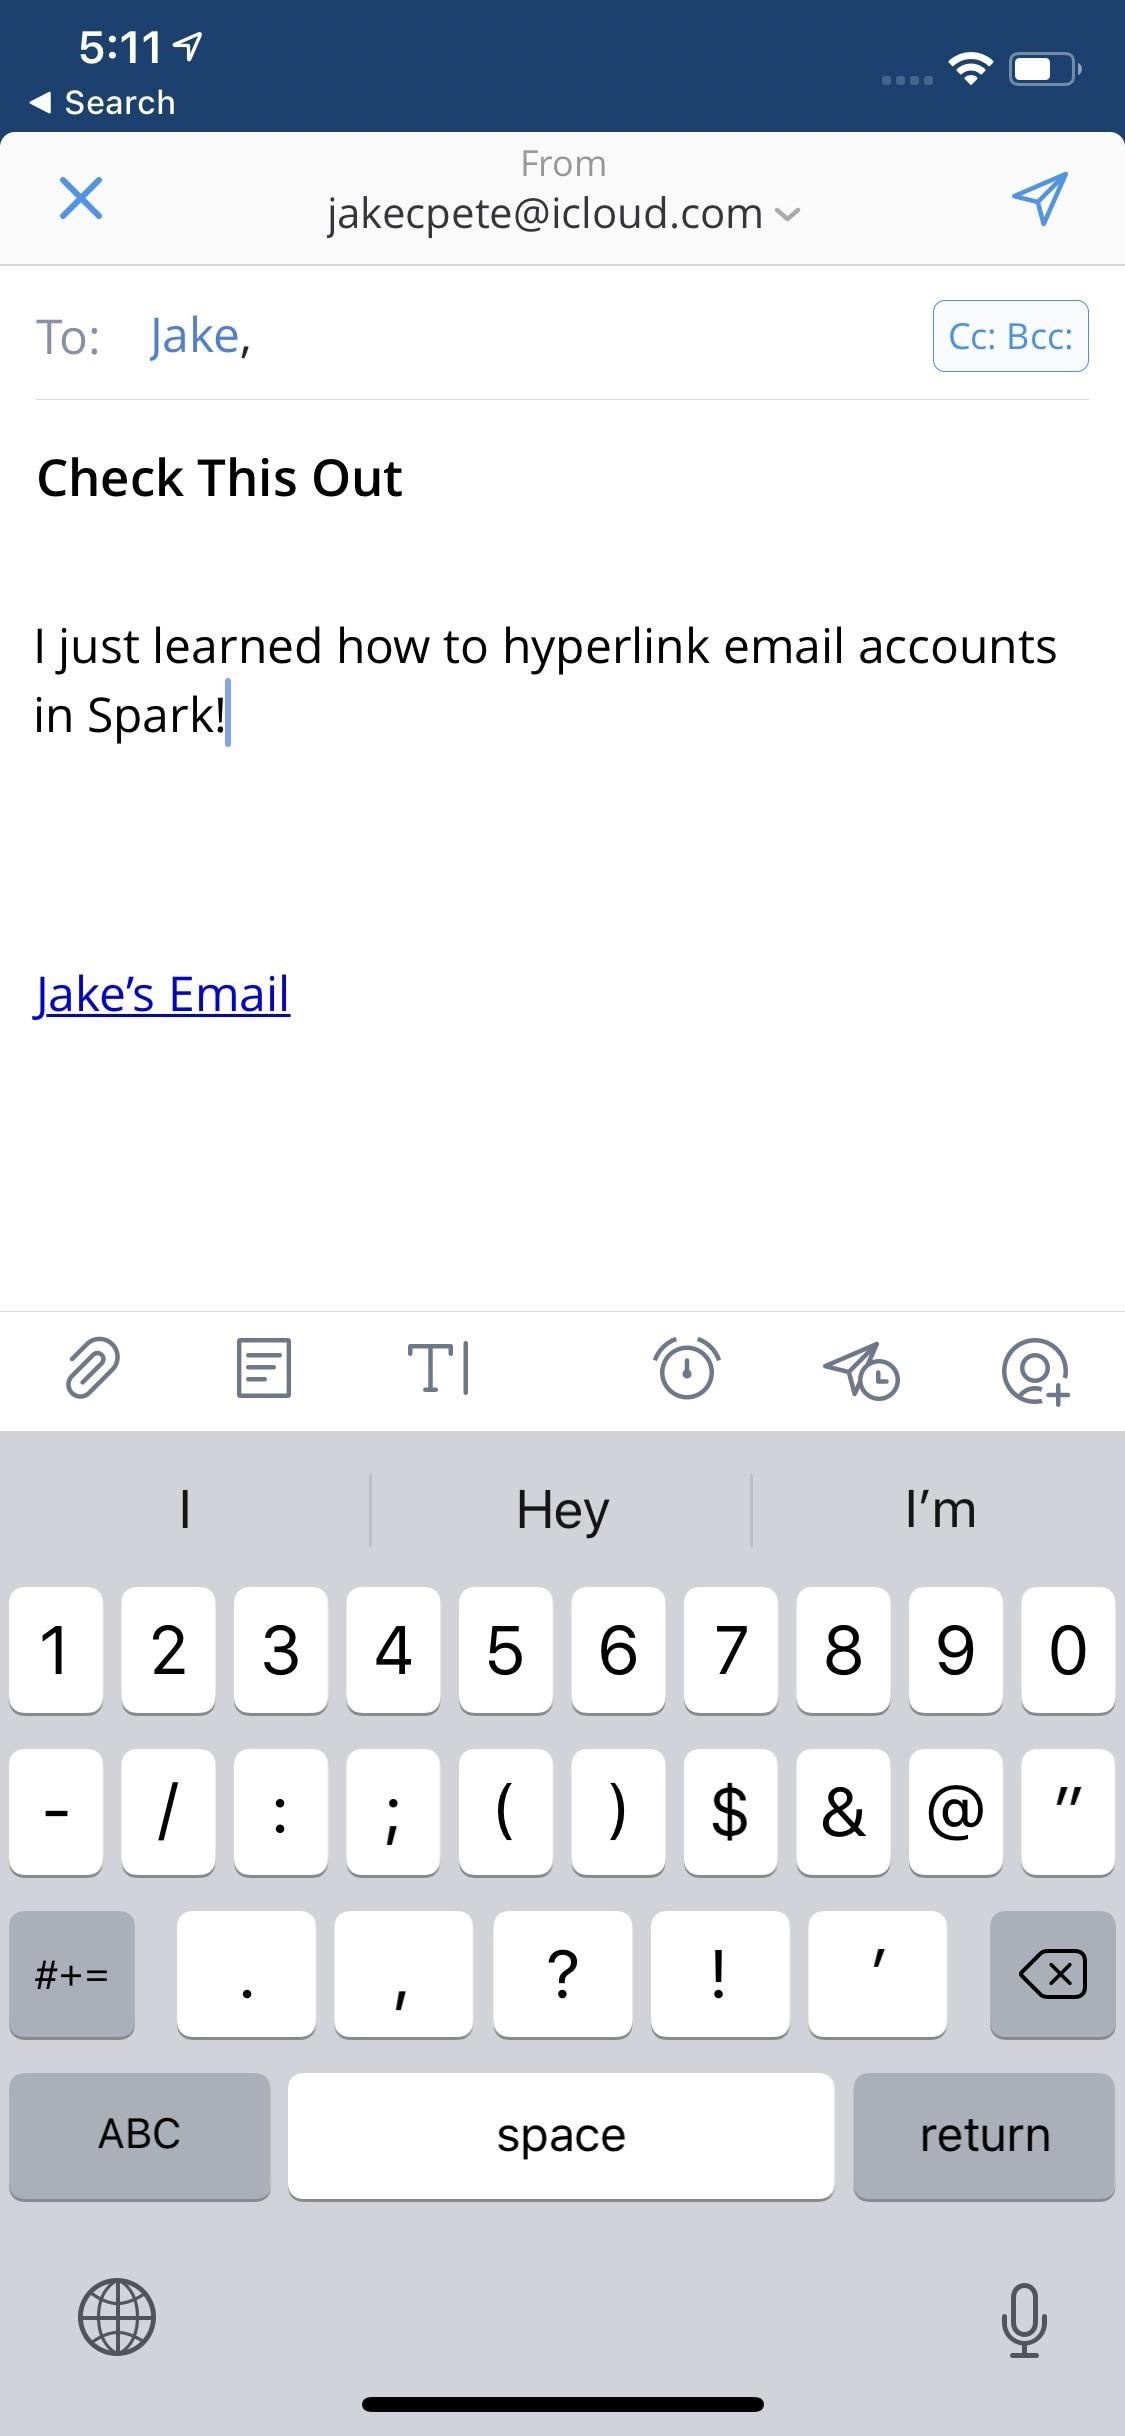 How to Add Hyperlinks to Your Emails in Spark for Cleaner Messages